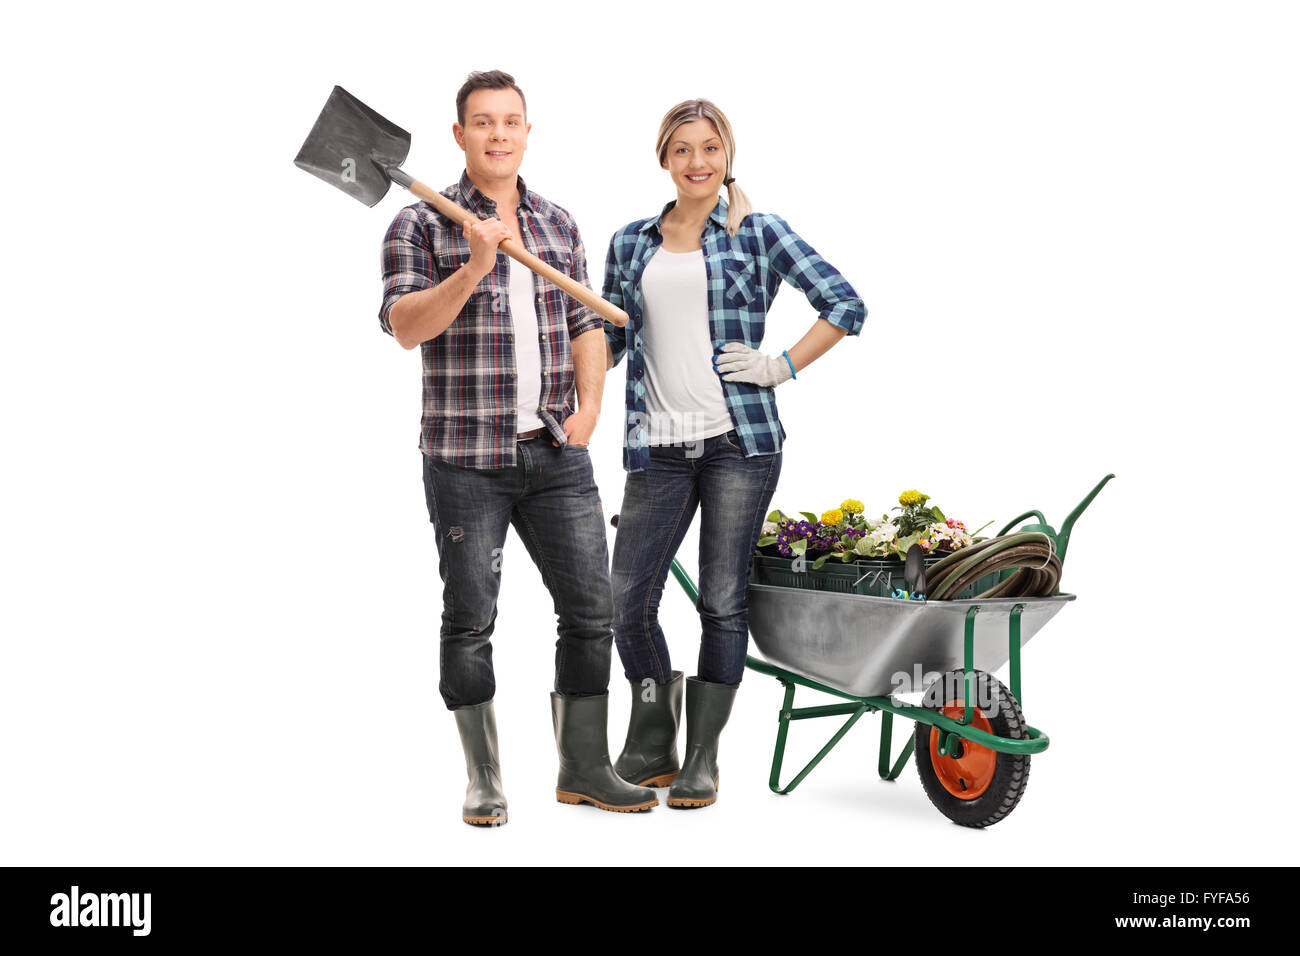 Full length portrait of a woman holding a rake and posing next to a wheelbarrow full of gardening equipment and flowers Stock Photo